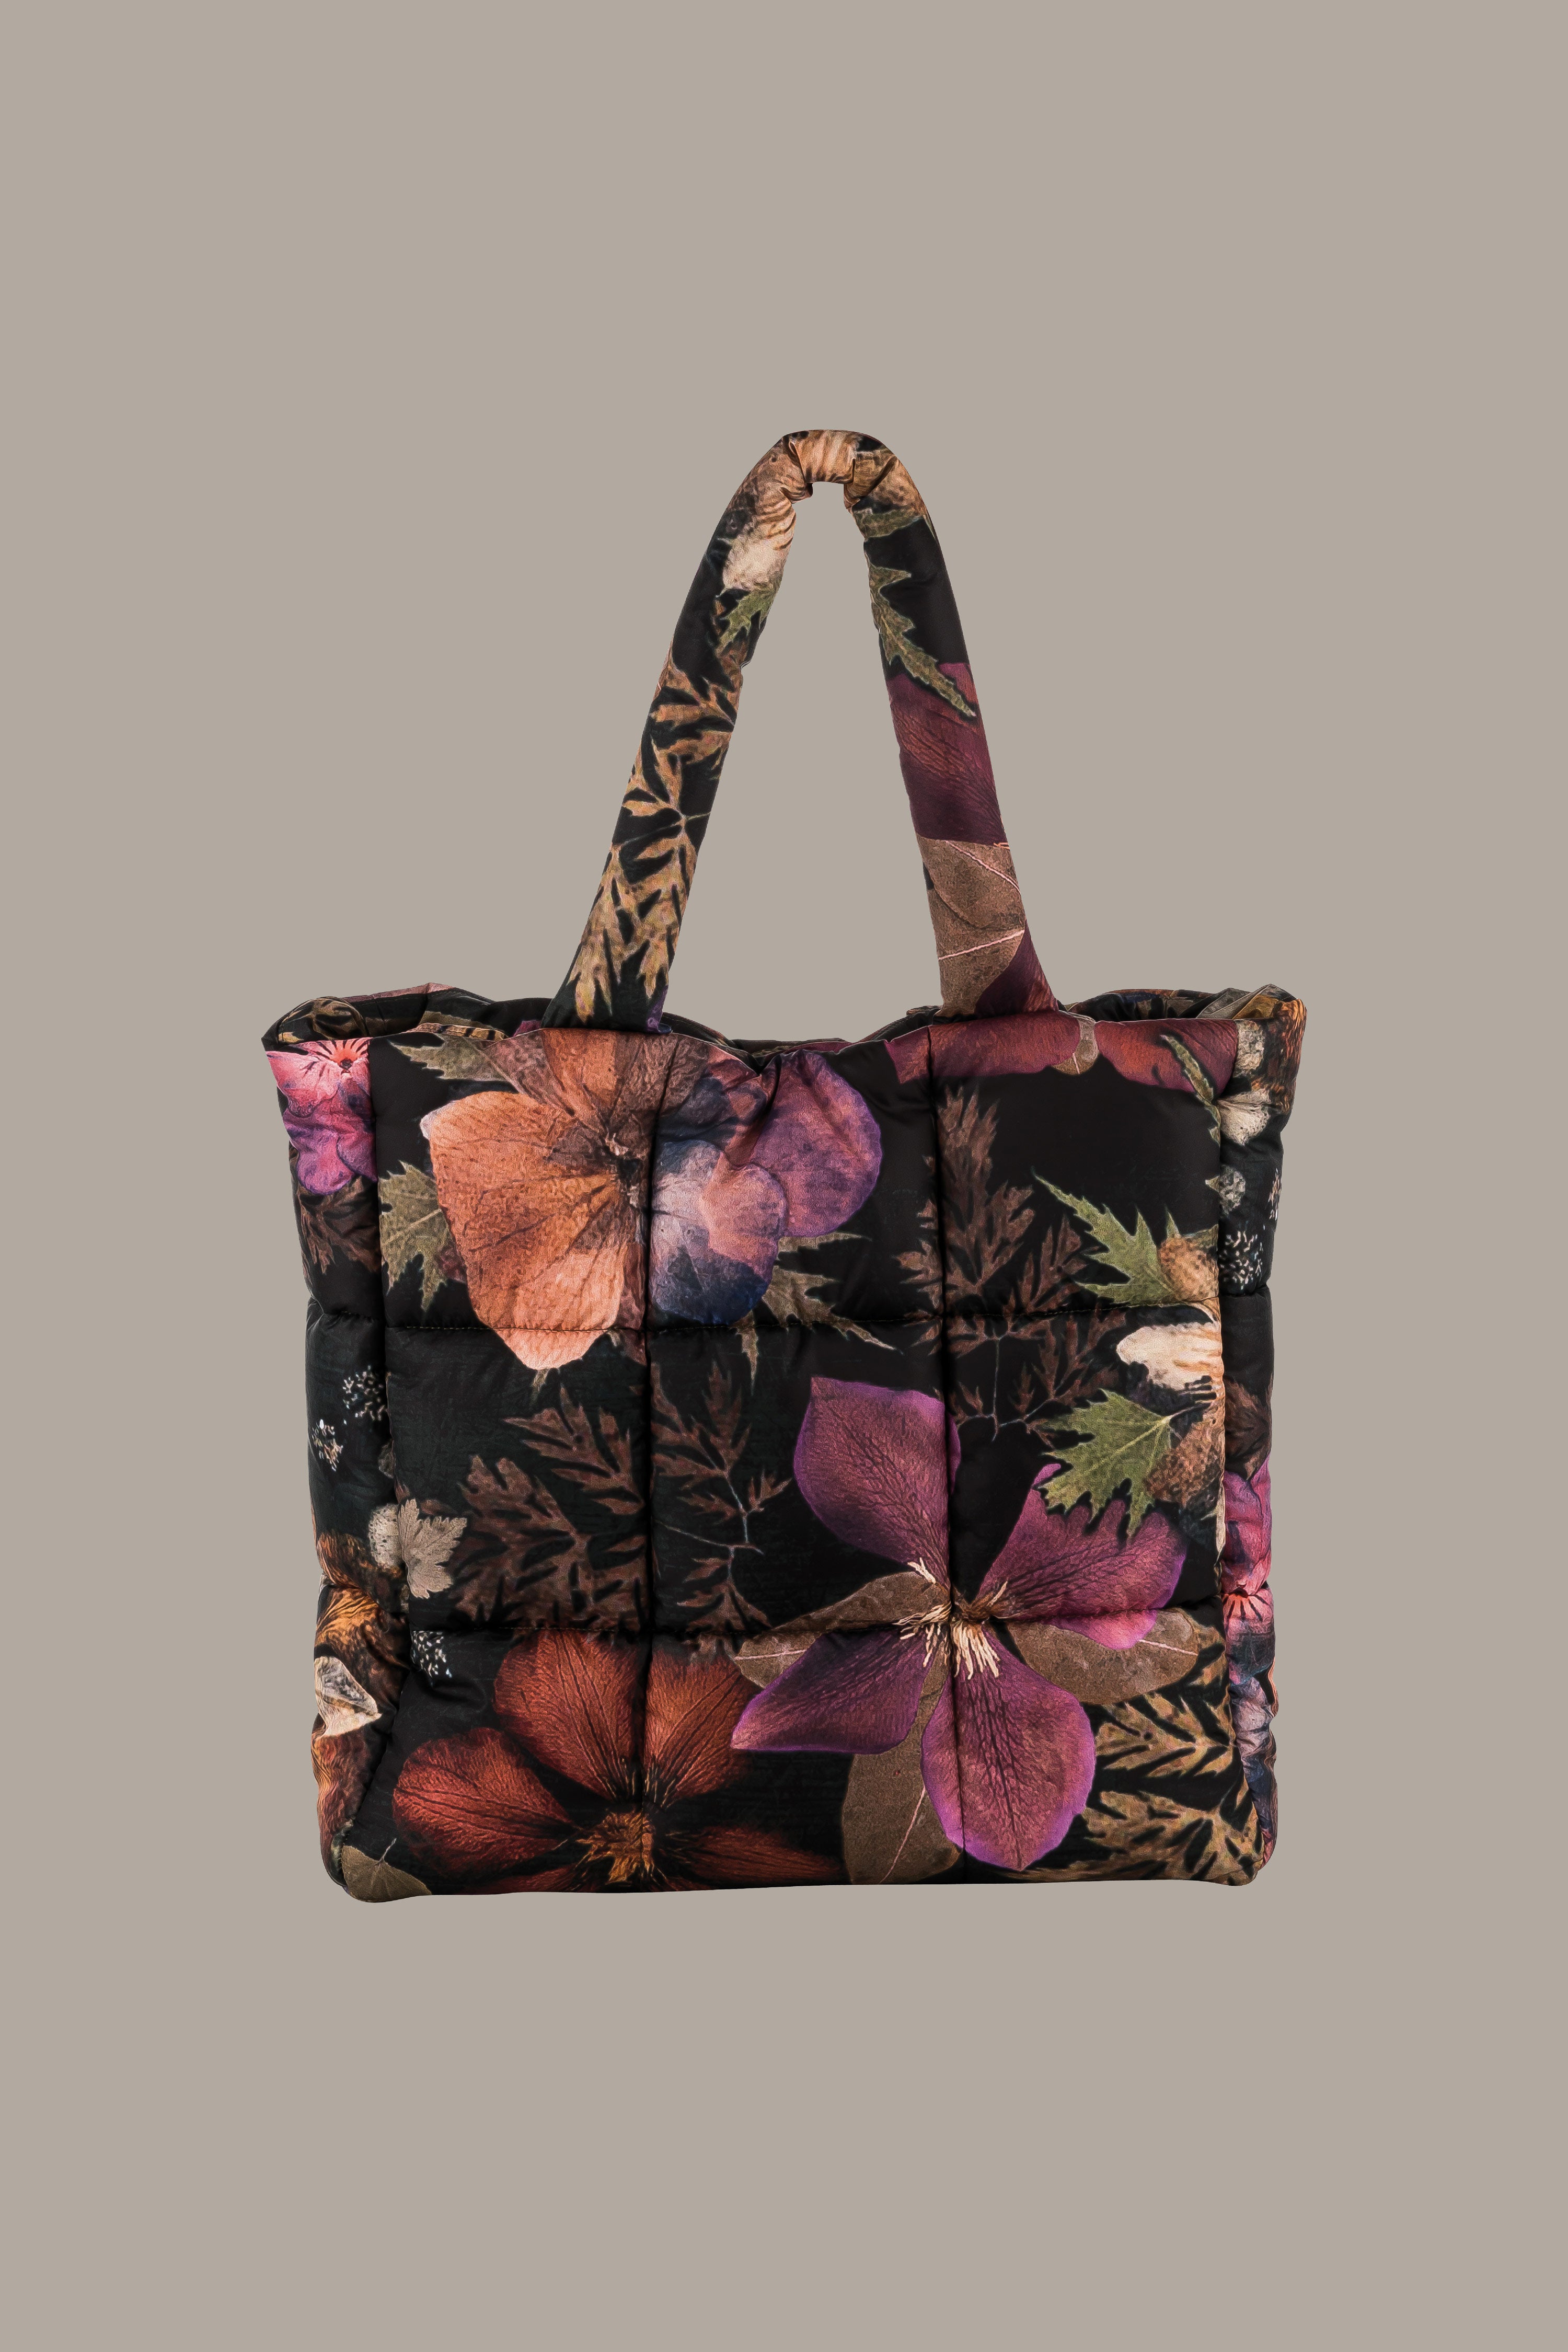 Puffy bag with flower print